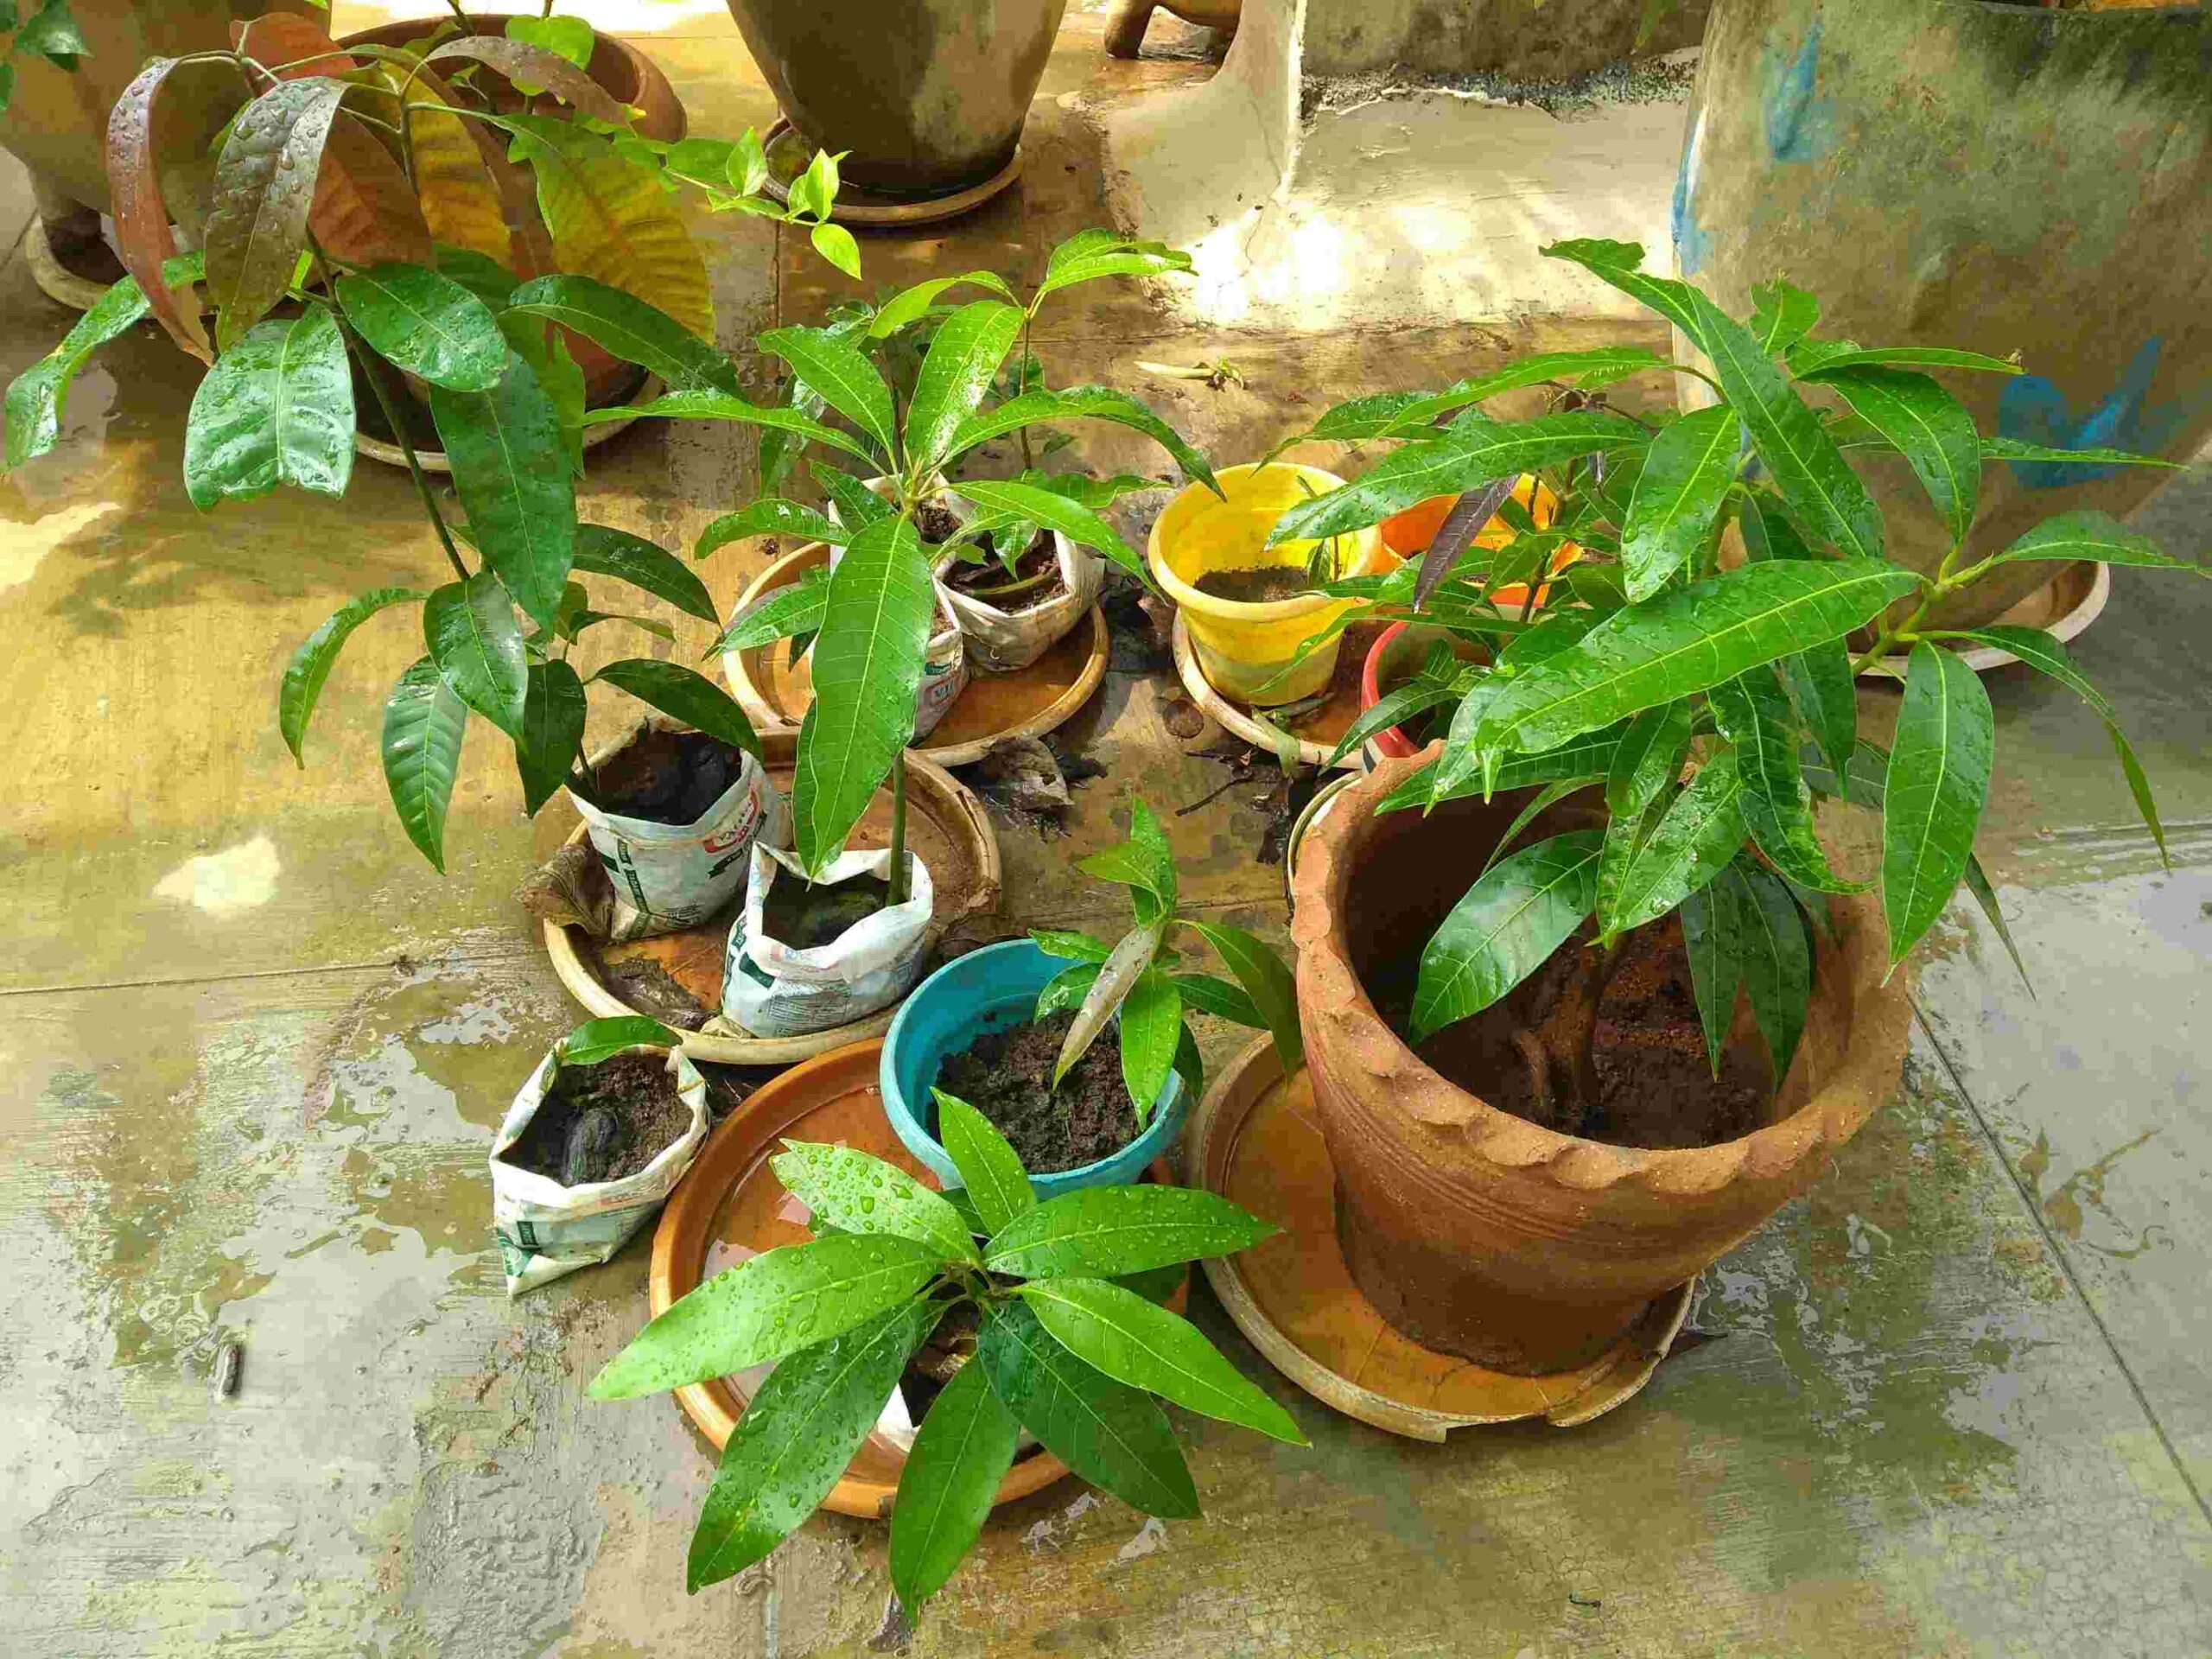 How to Grow Mango Trees at Home in Just 6 Easy Steps